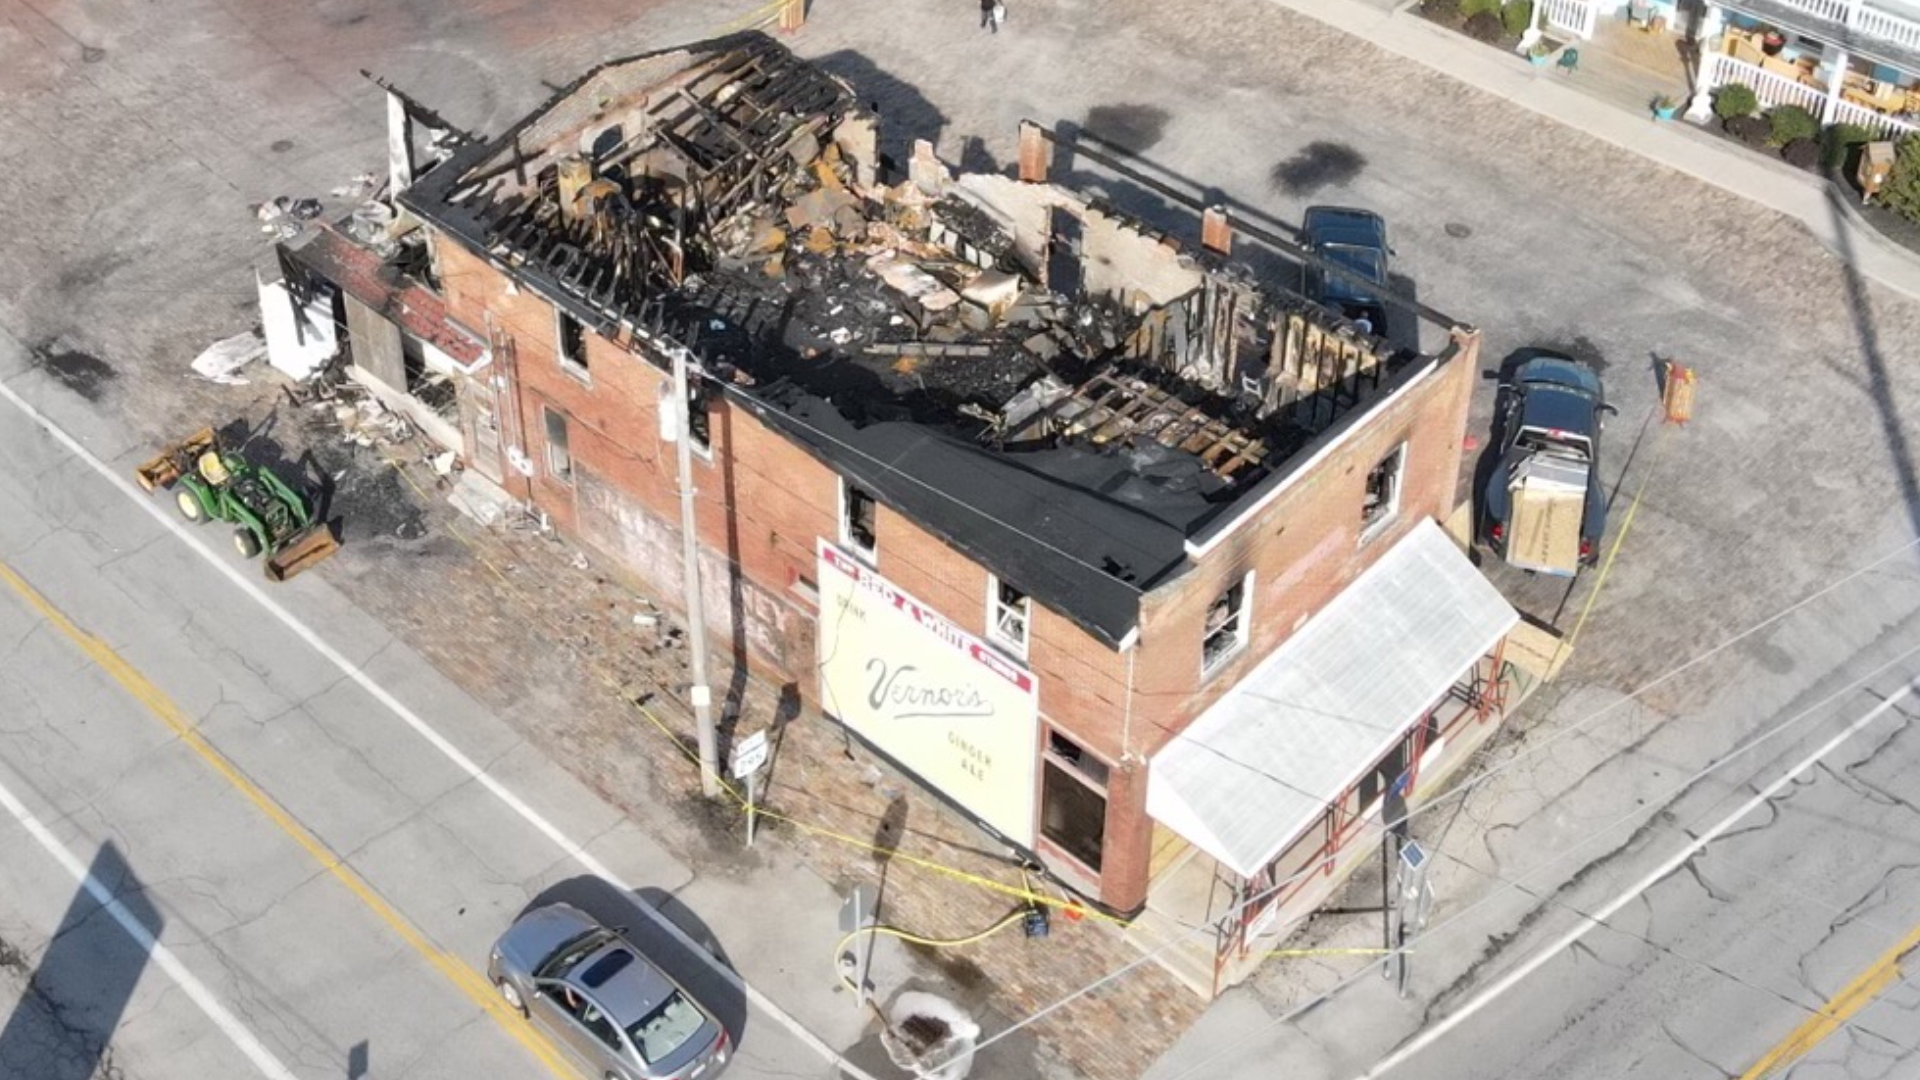 An early Sunday morning fire ripped through the over 100-year-old hardware and carryout store Keeler's Korner in the small town of Berkey.